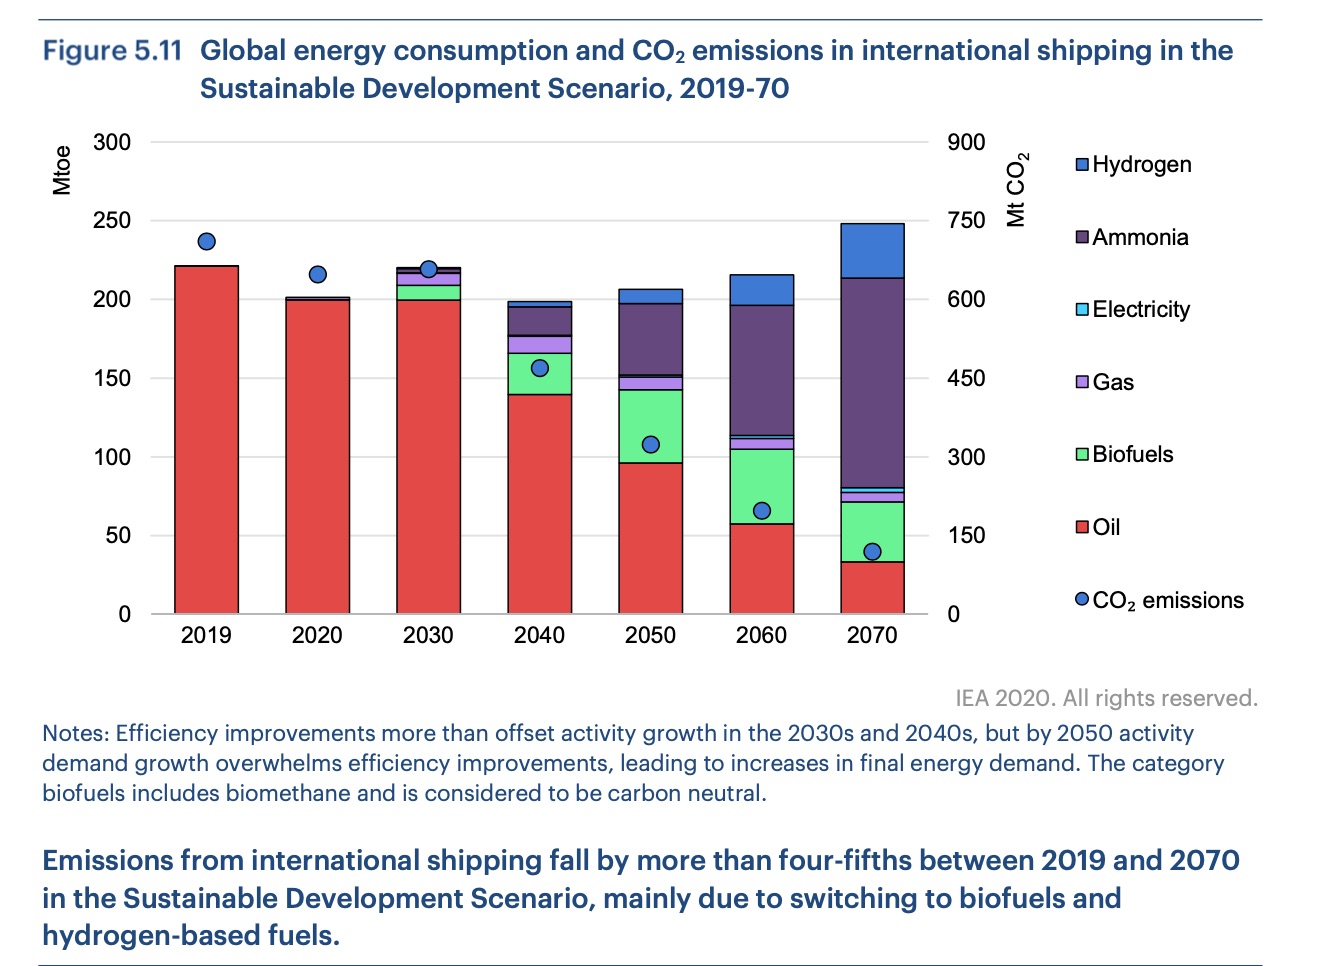 Energy consumption and CO2 emissions